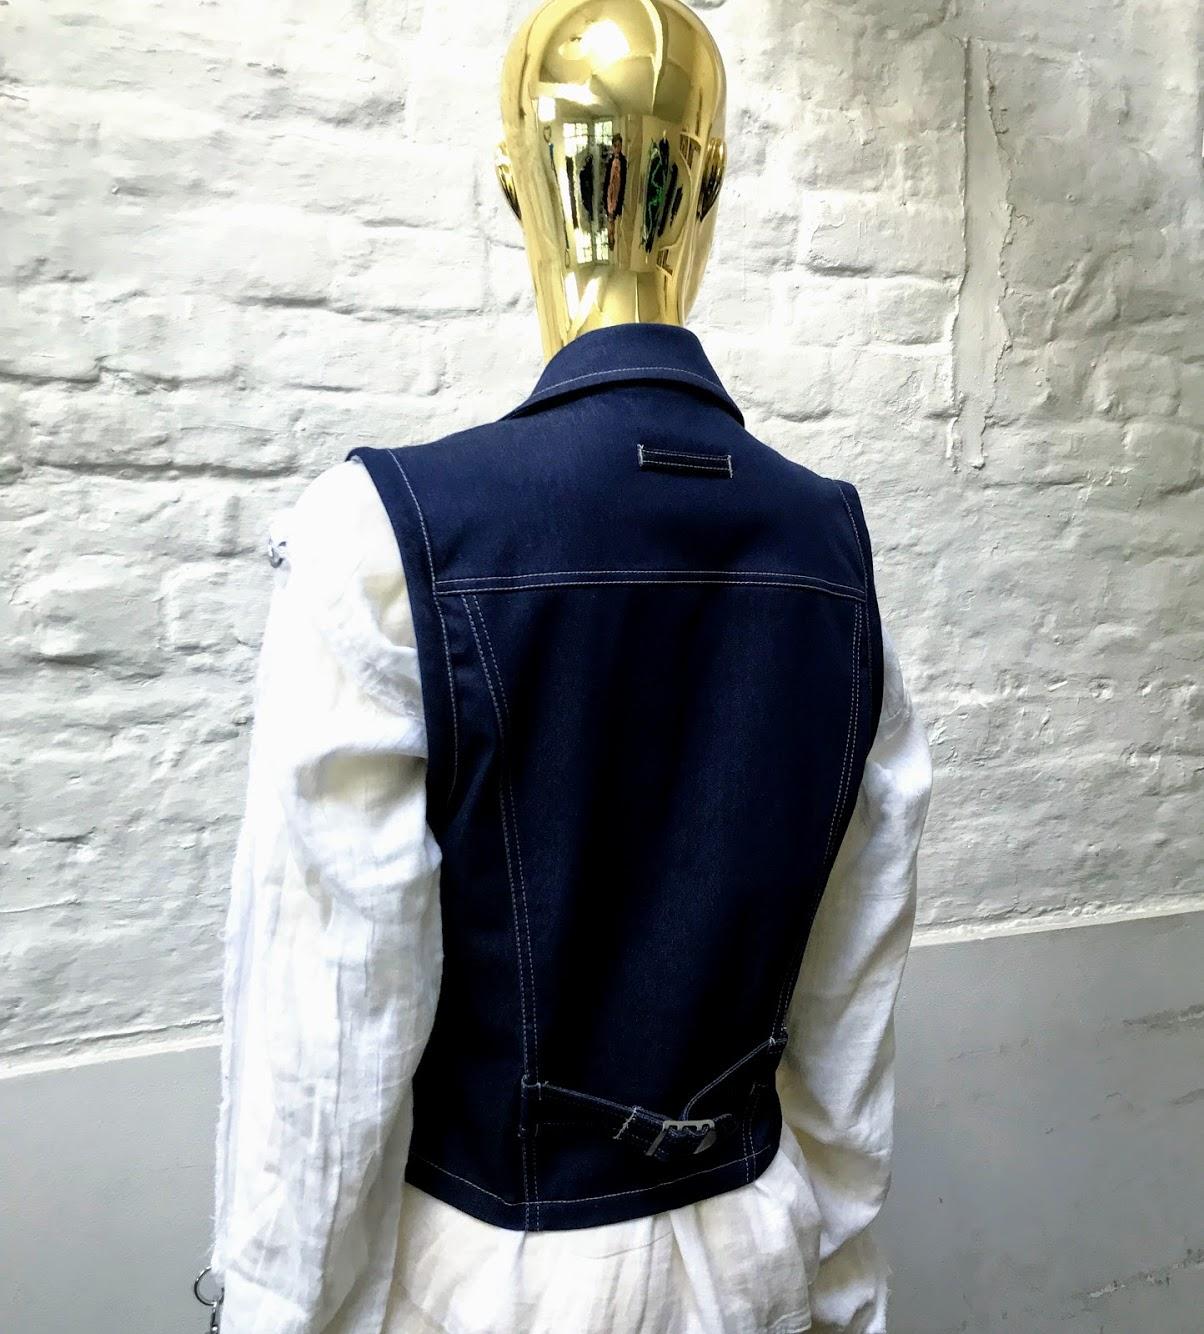 Jean Paul Gaultier Denim Pin Waistcoat In Excellent Condition For Sale In London, GB